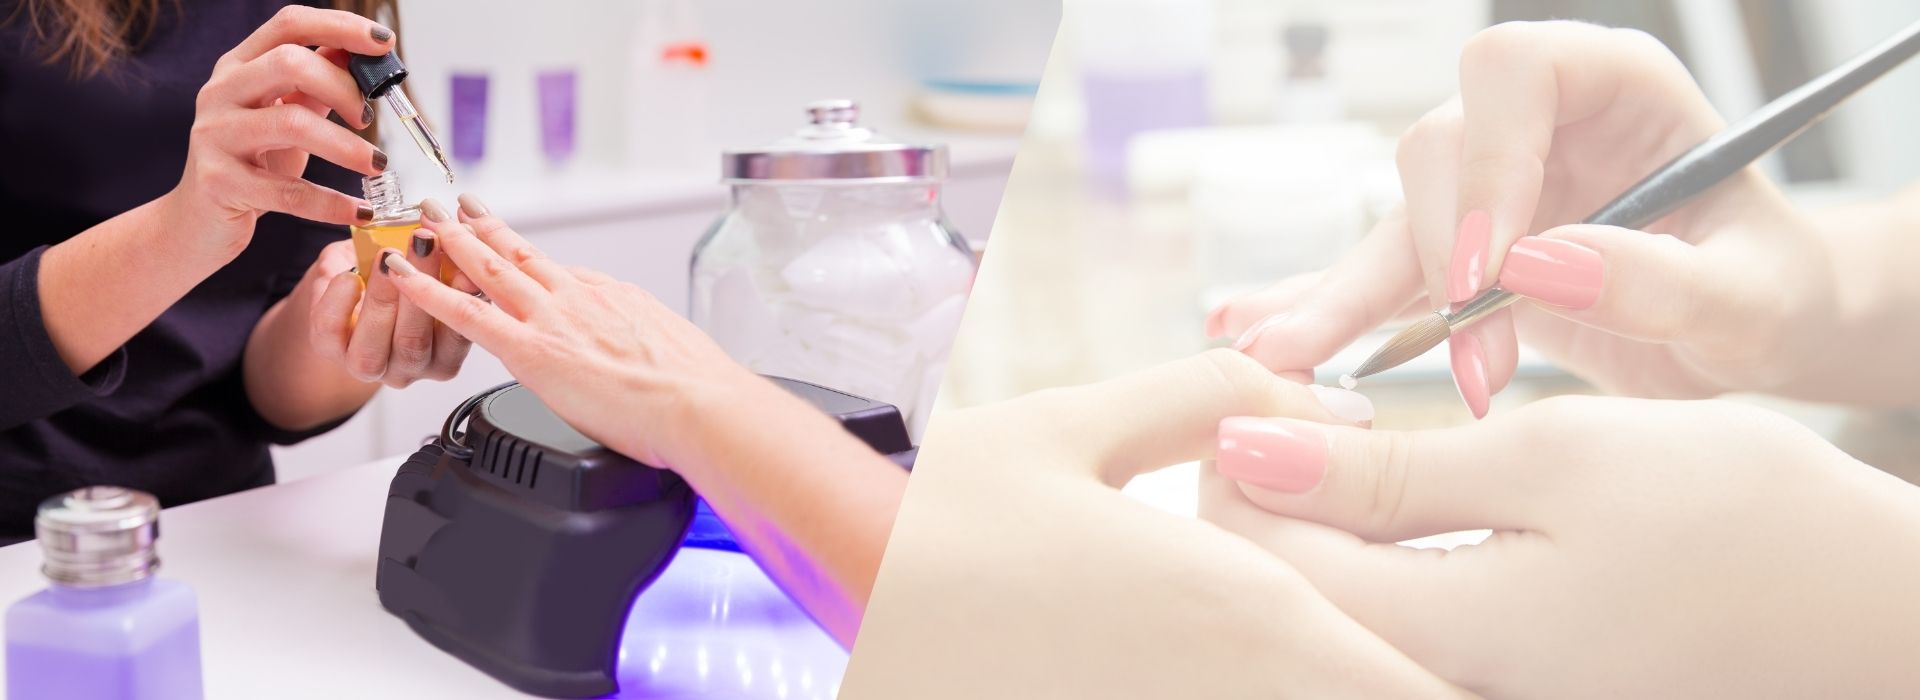 Best Nail Salons Sydney | Top Nail Artists Near Me | Shout in Australia